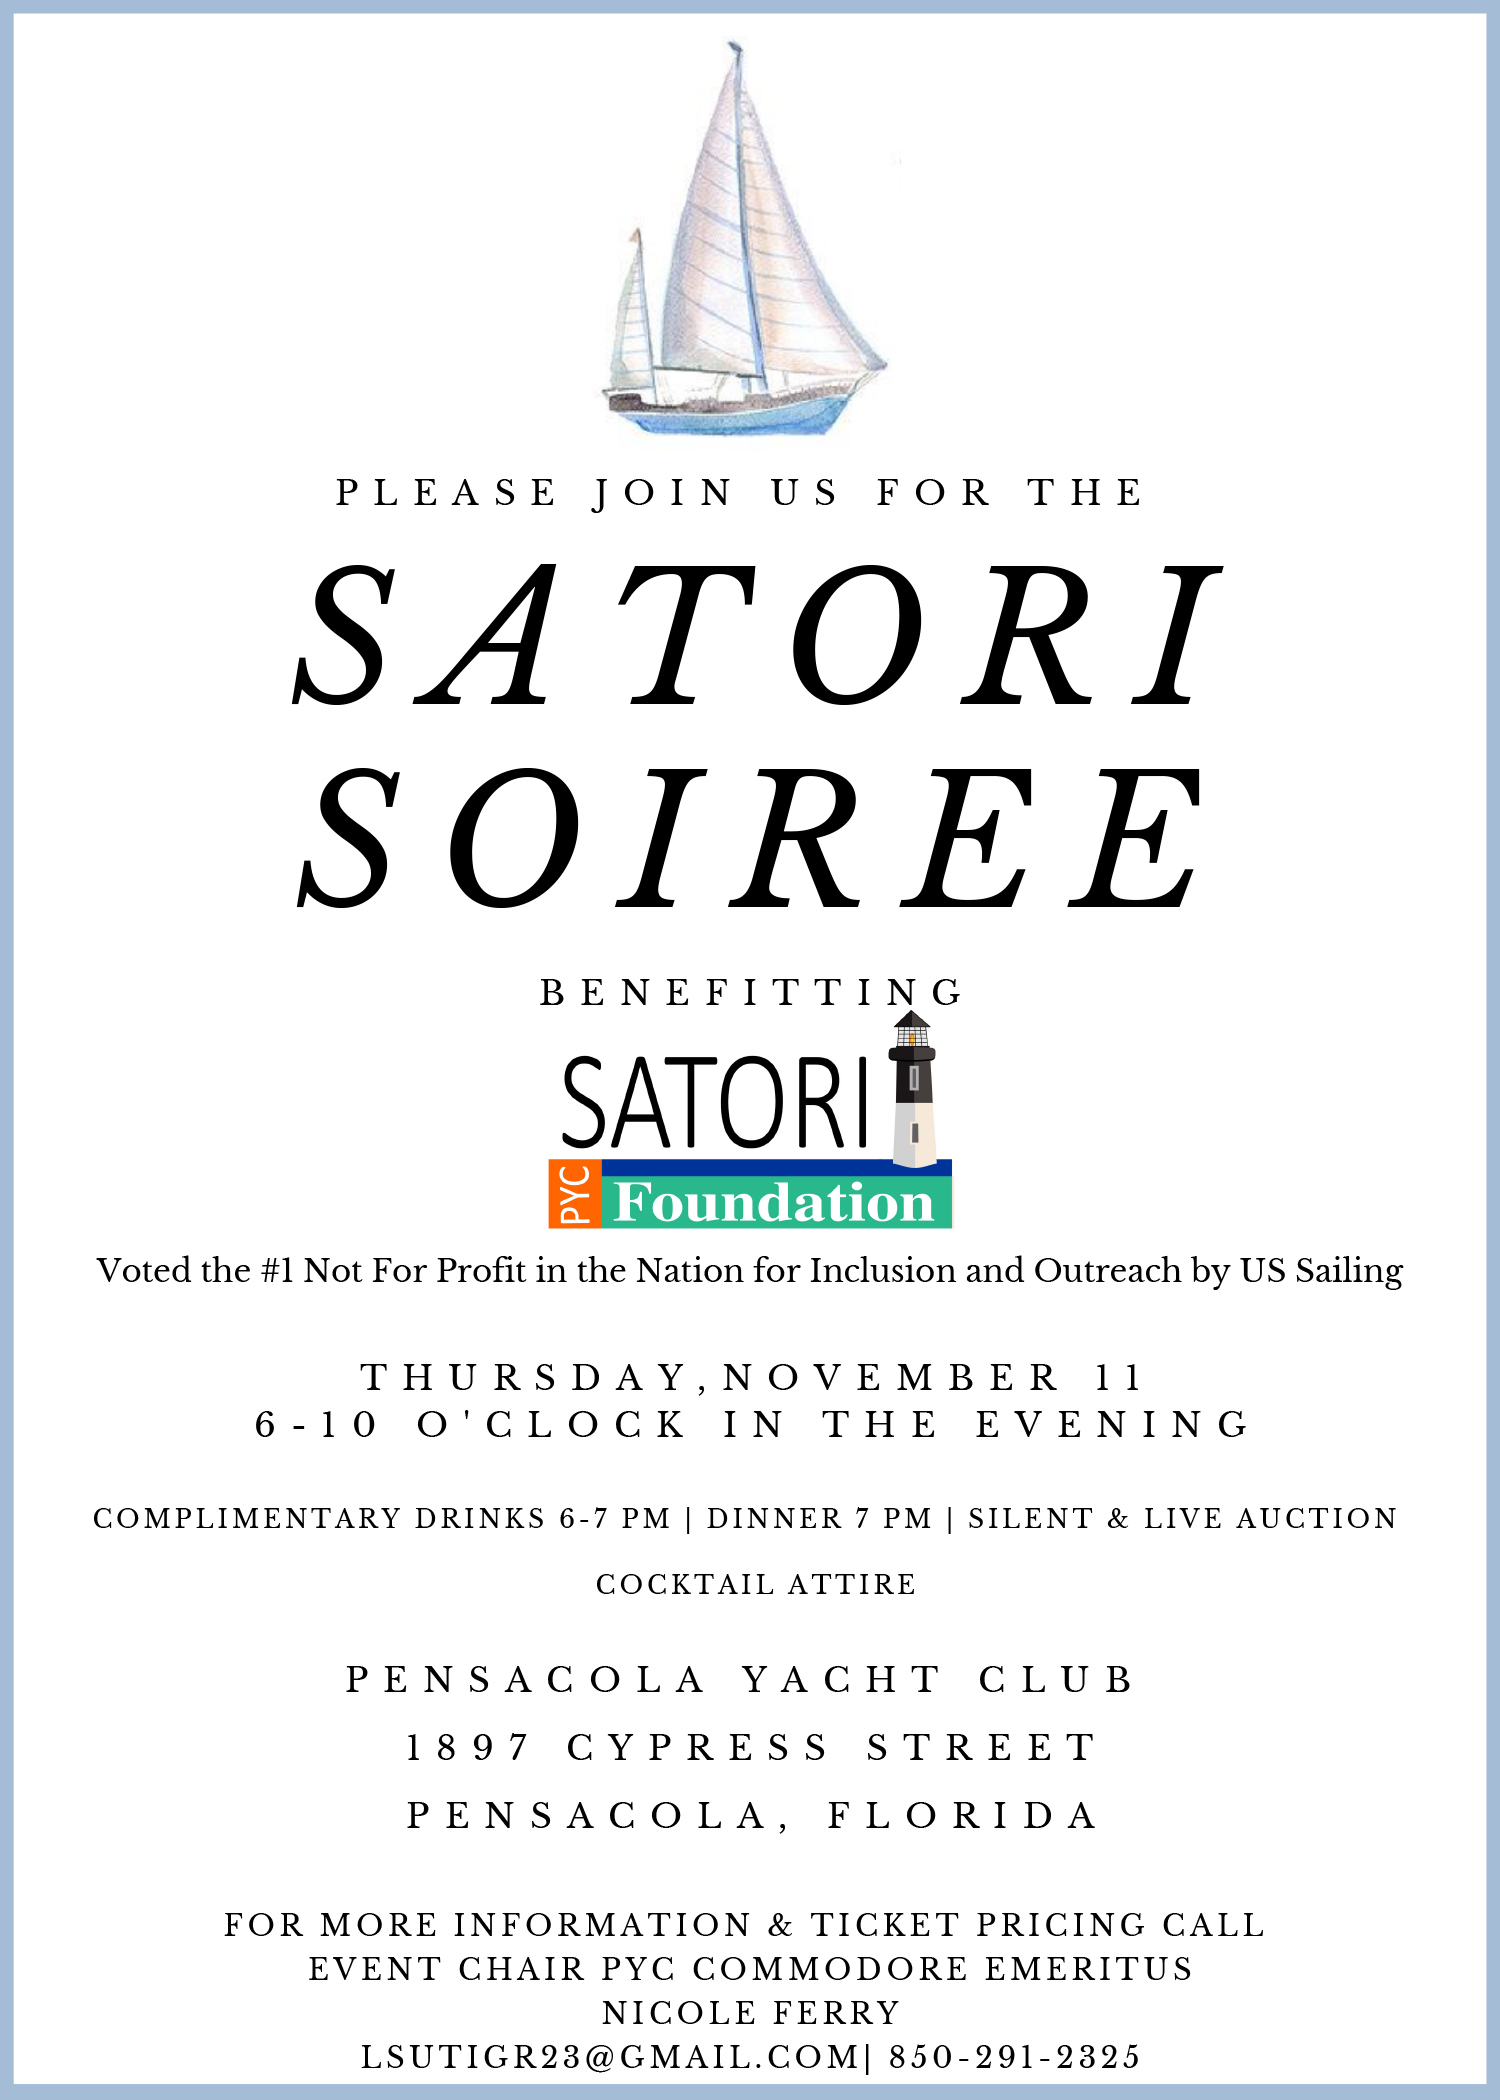 You are invited to join the Satori Foundation for a